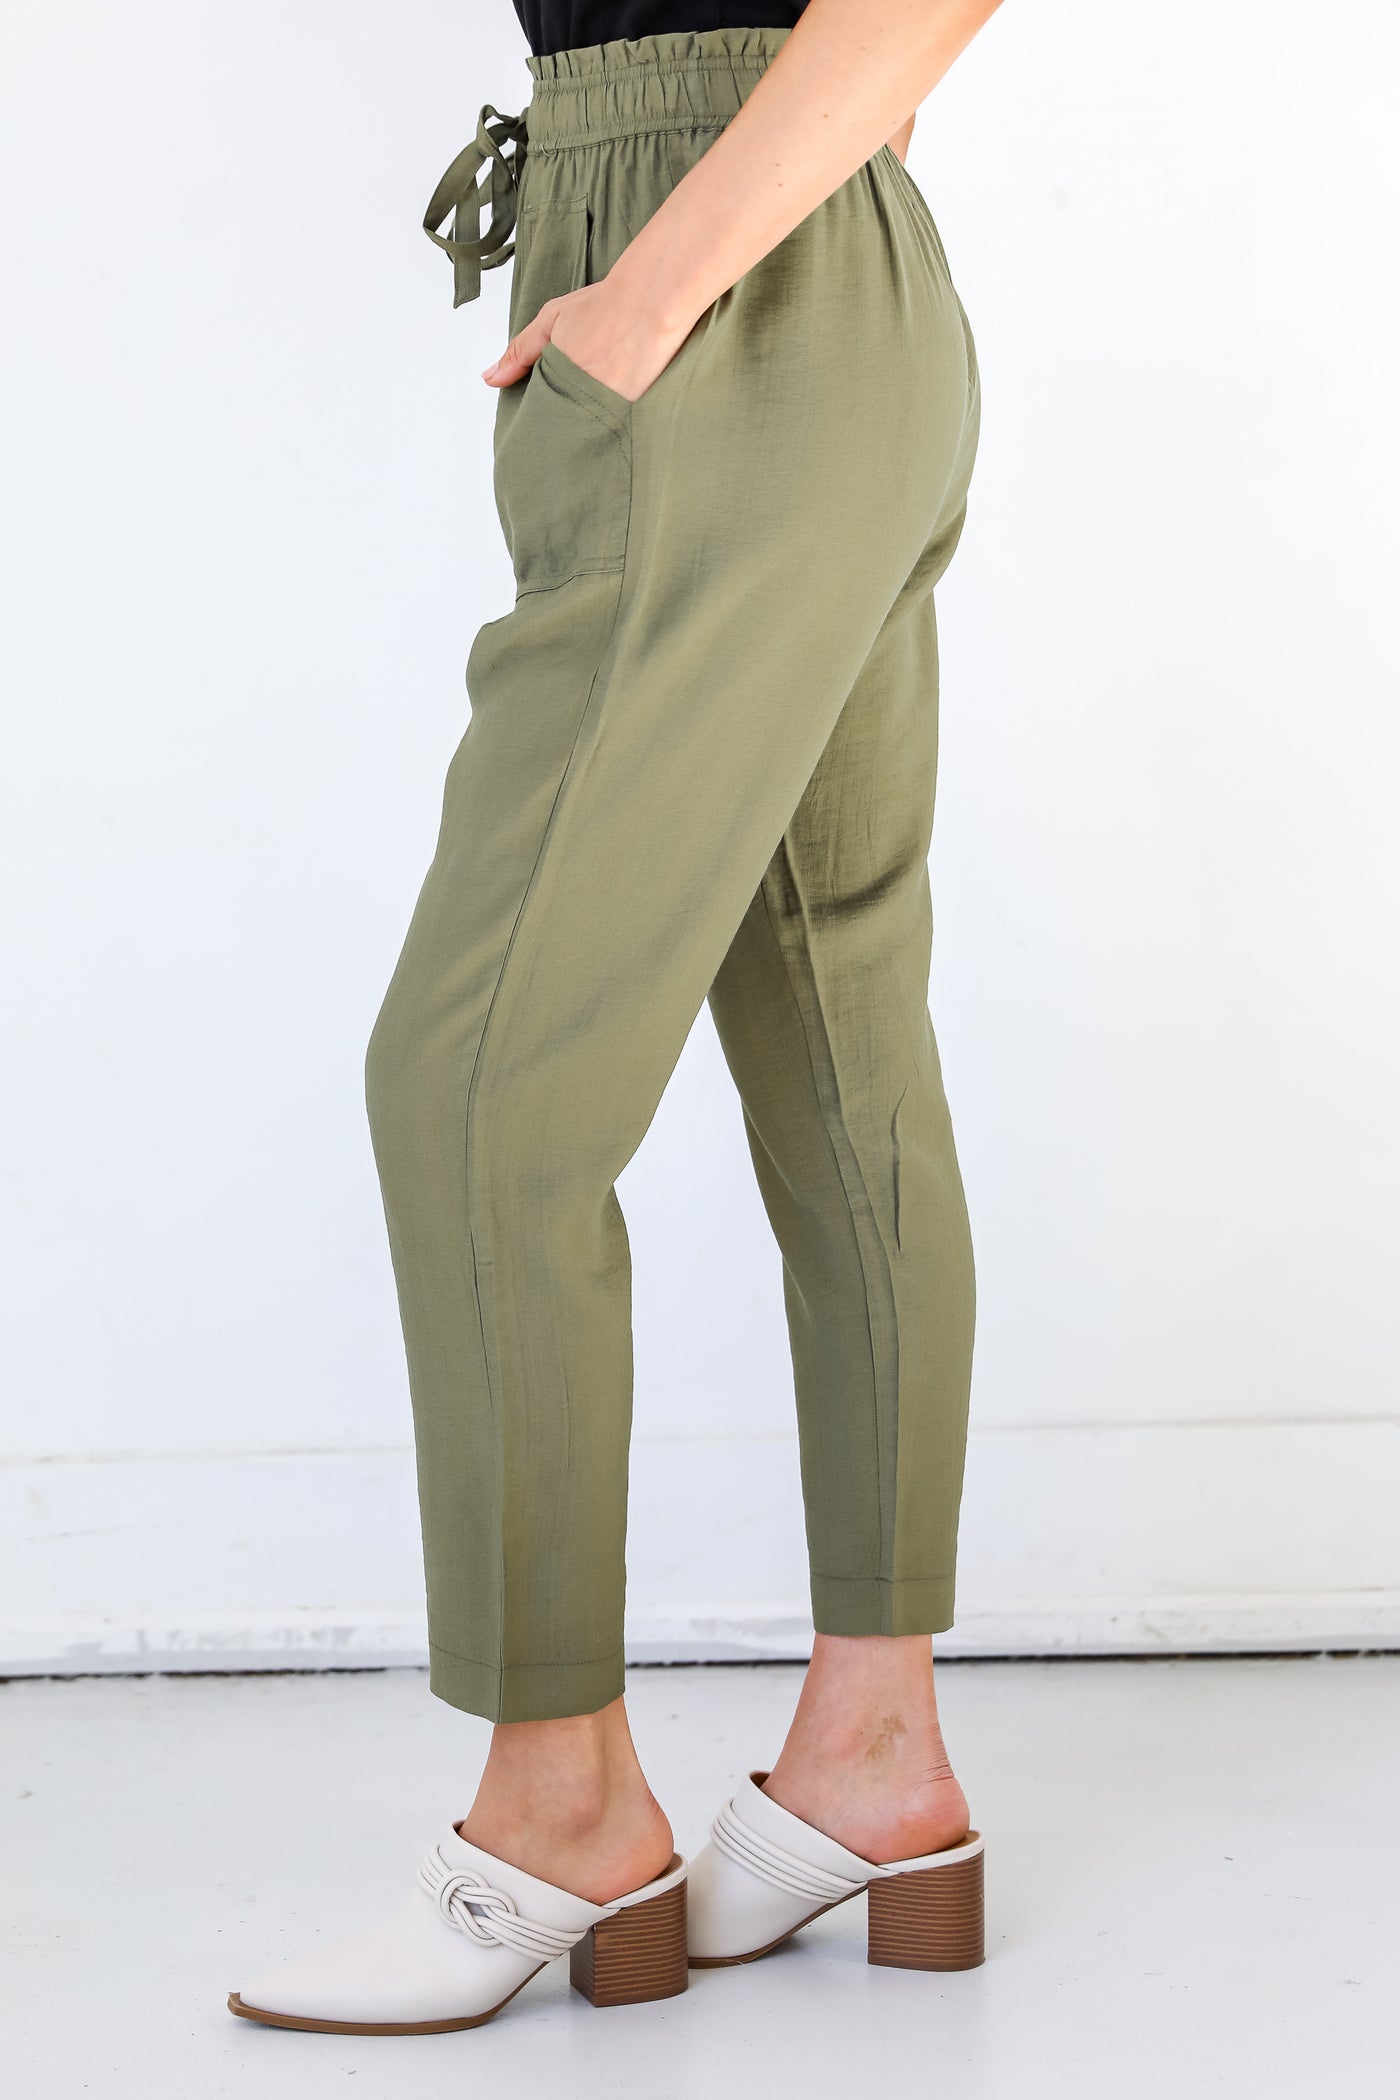 olive Paperbag Waist Pants side view